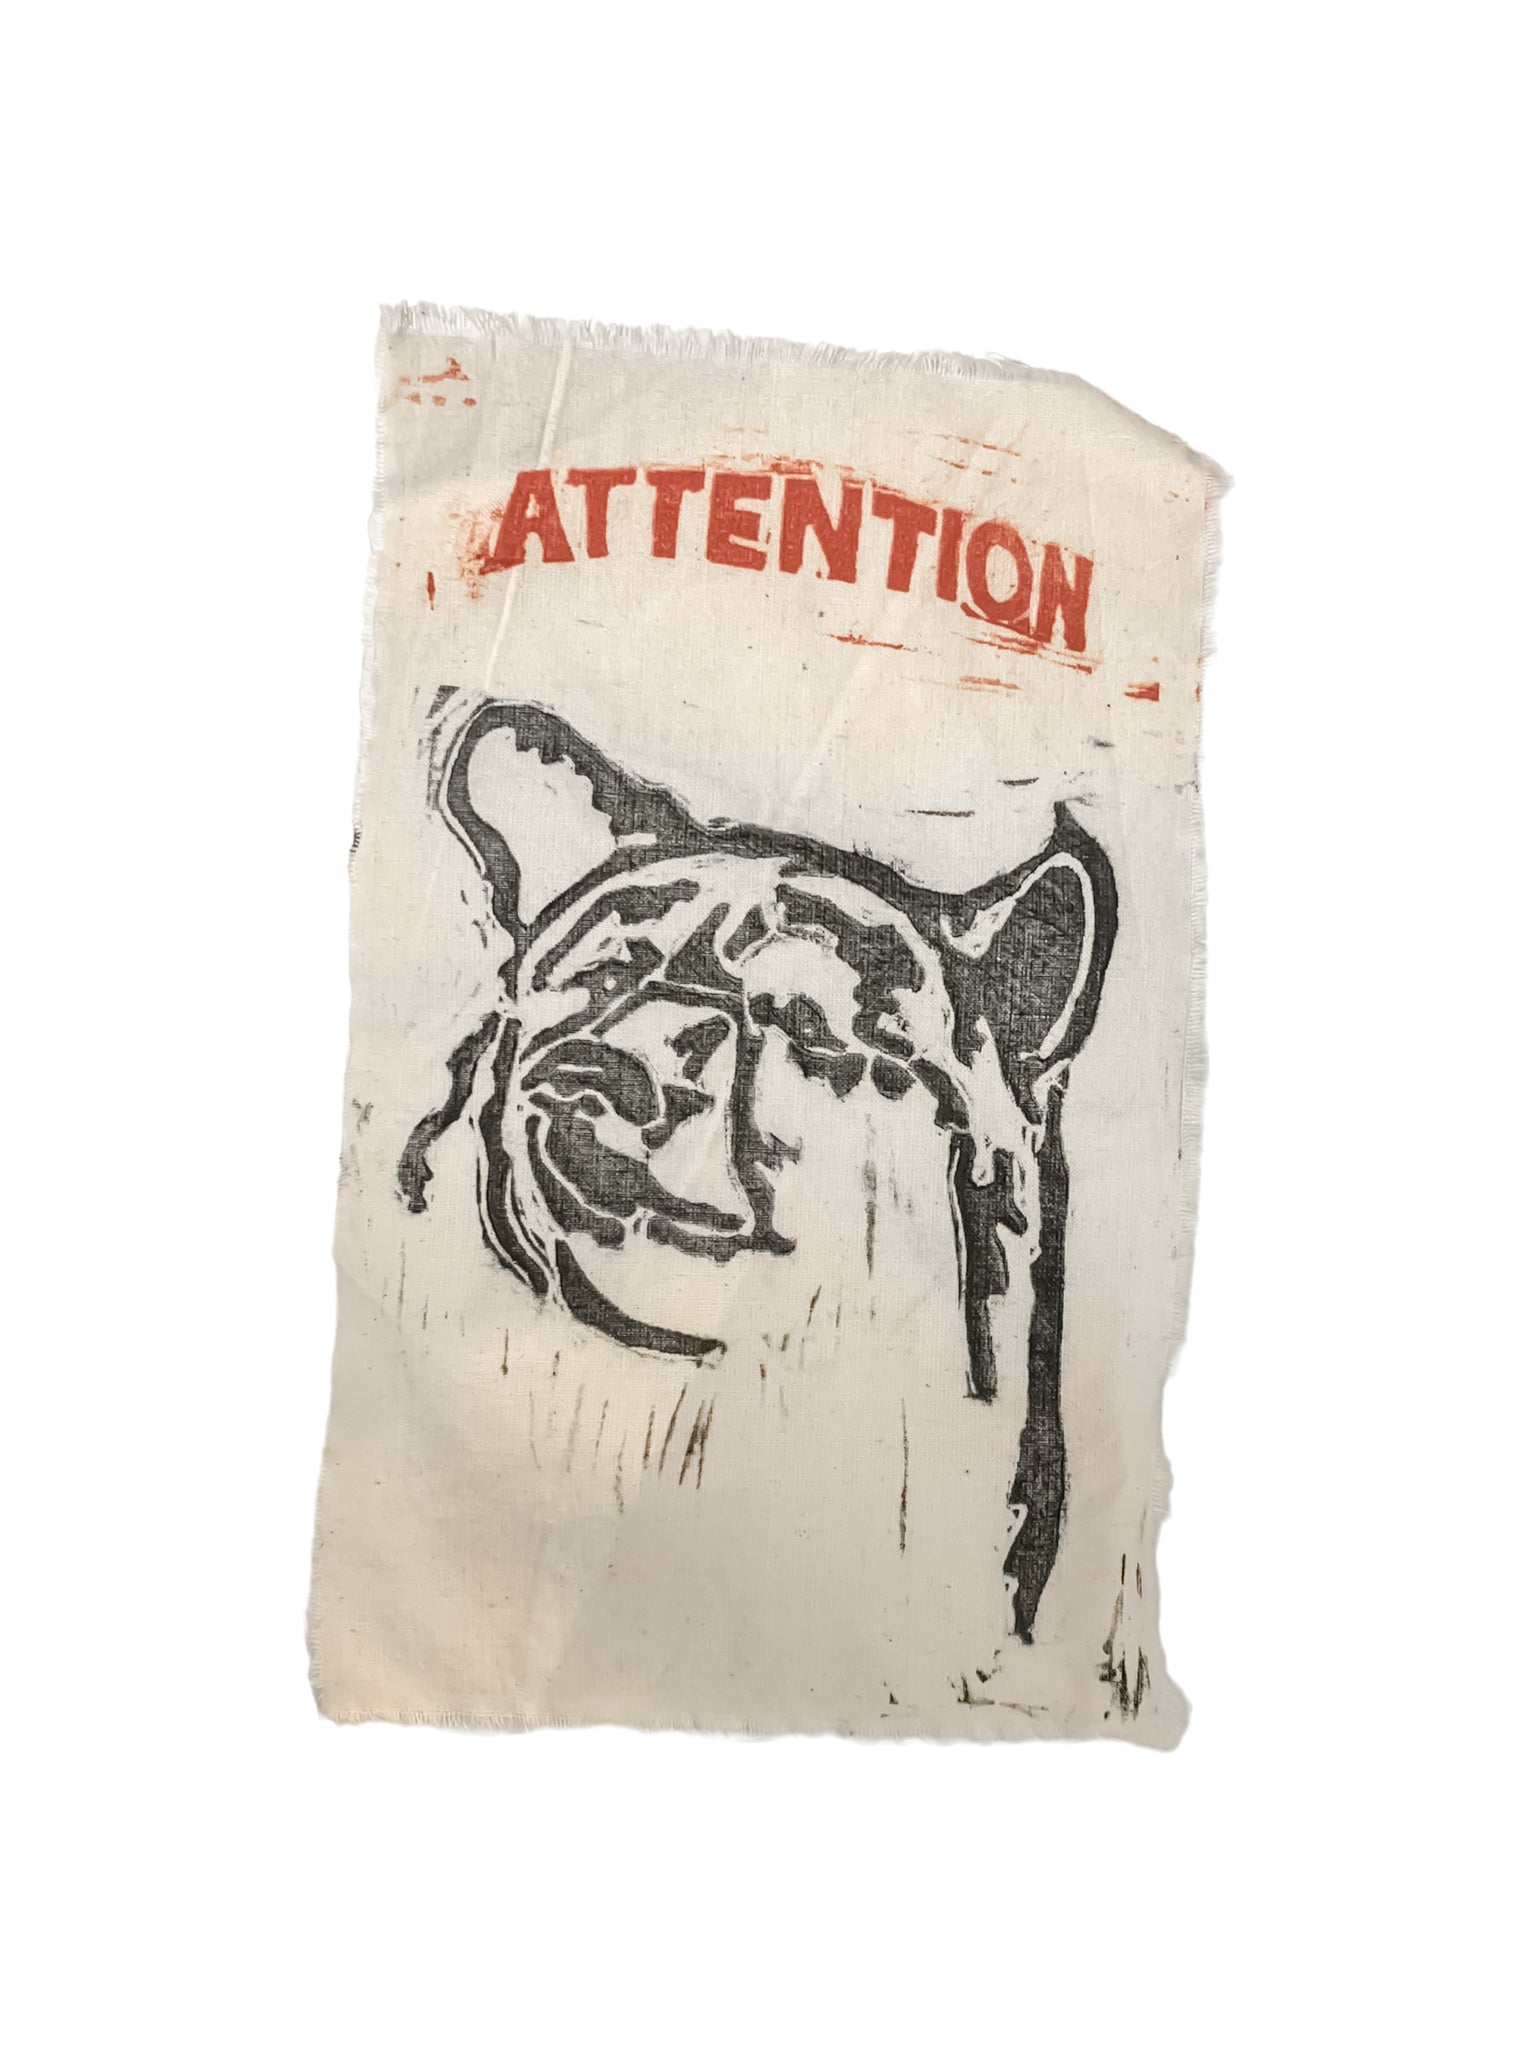 ATTENTION bear patches